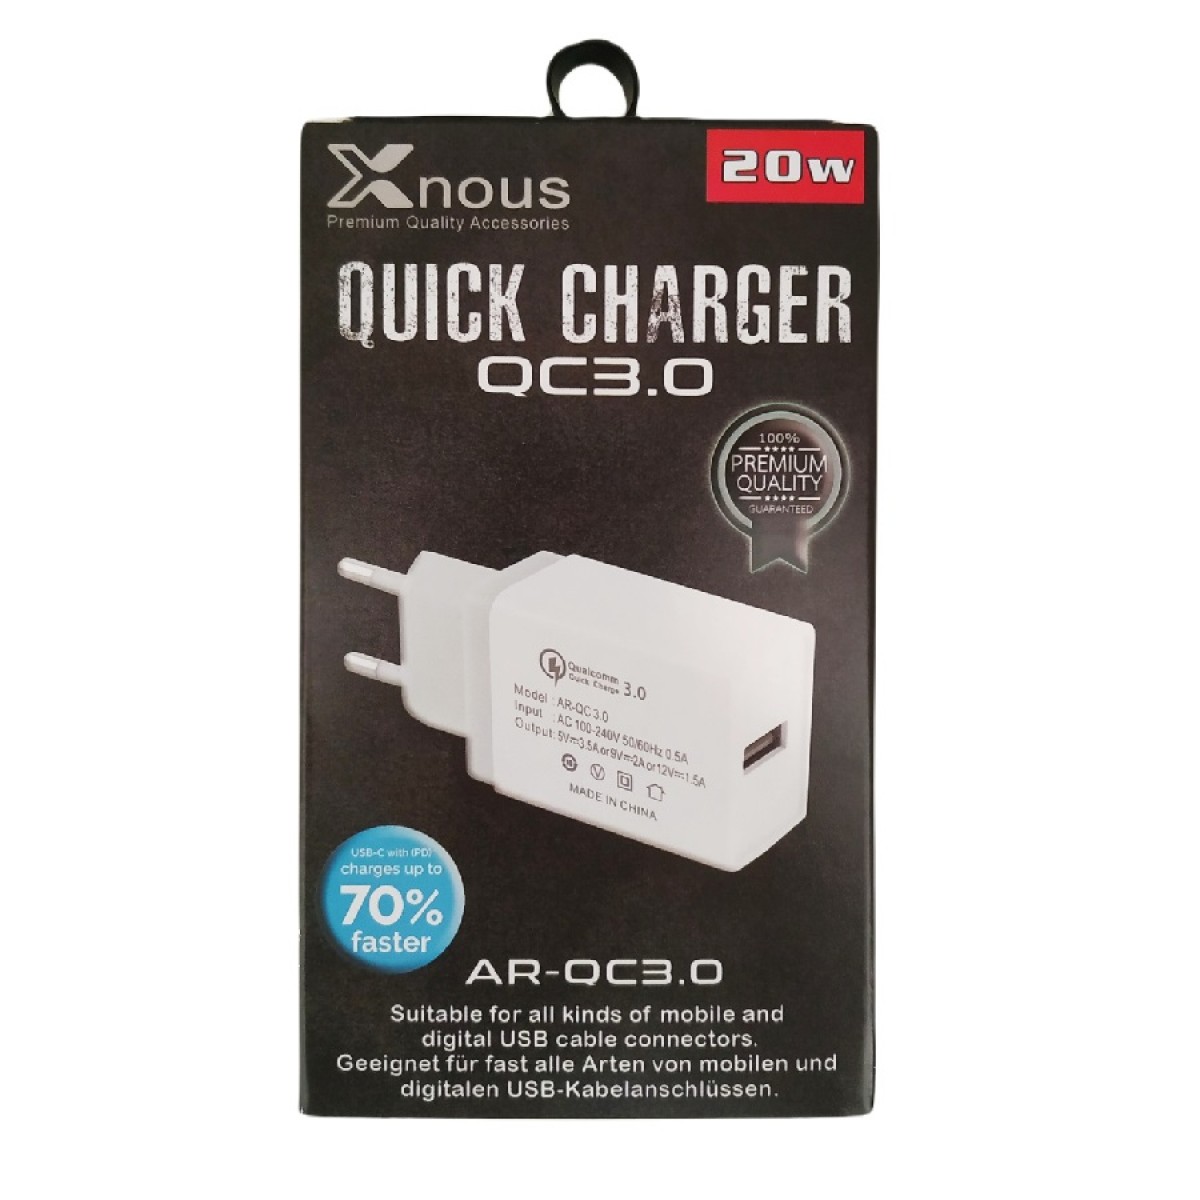 CHARGER QUICK XNOUS QC10 AR-QC 3.0 USB 3 18W WHITE